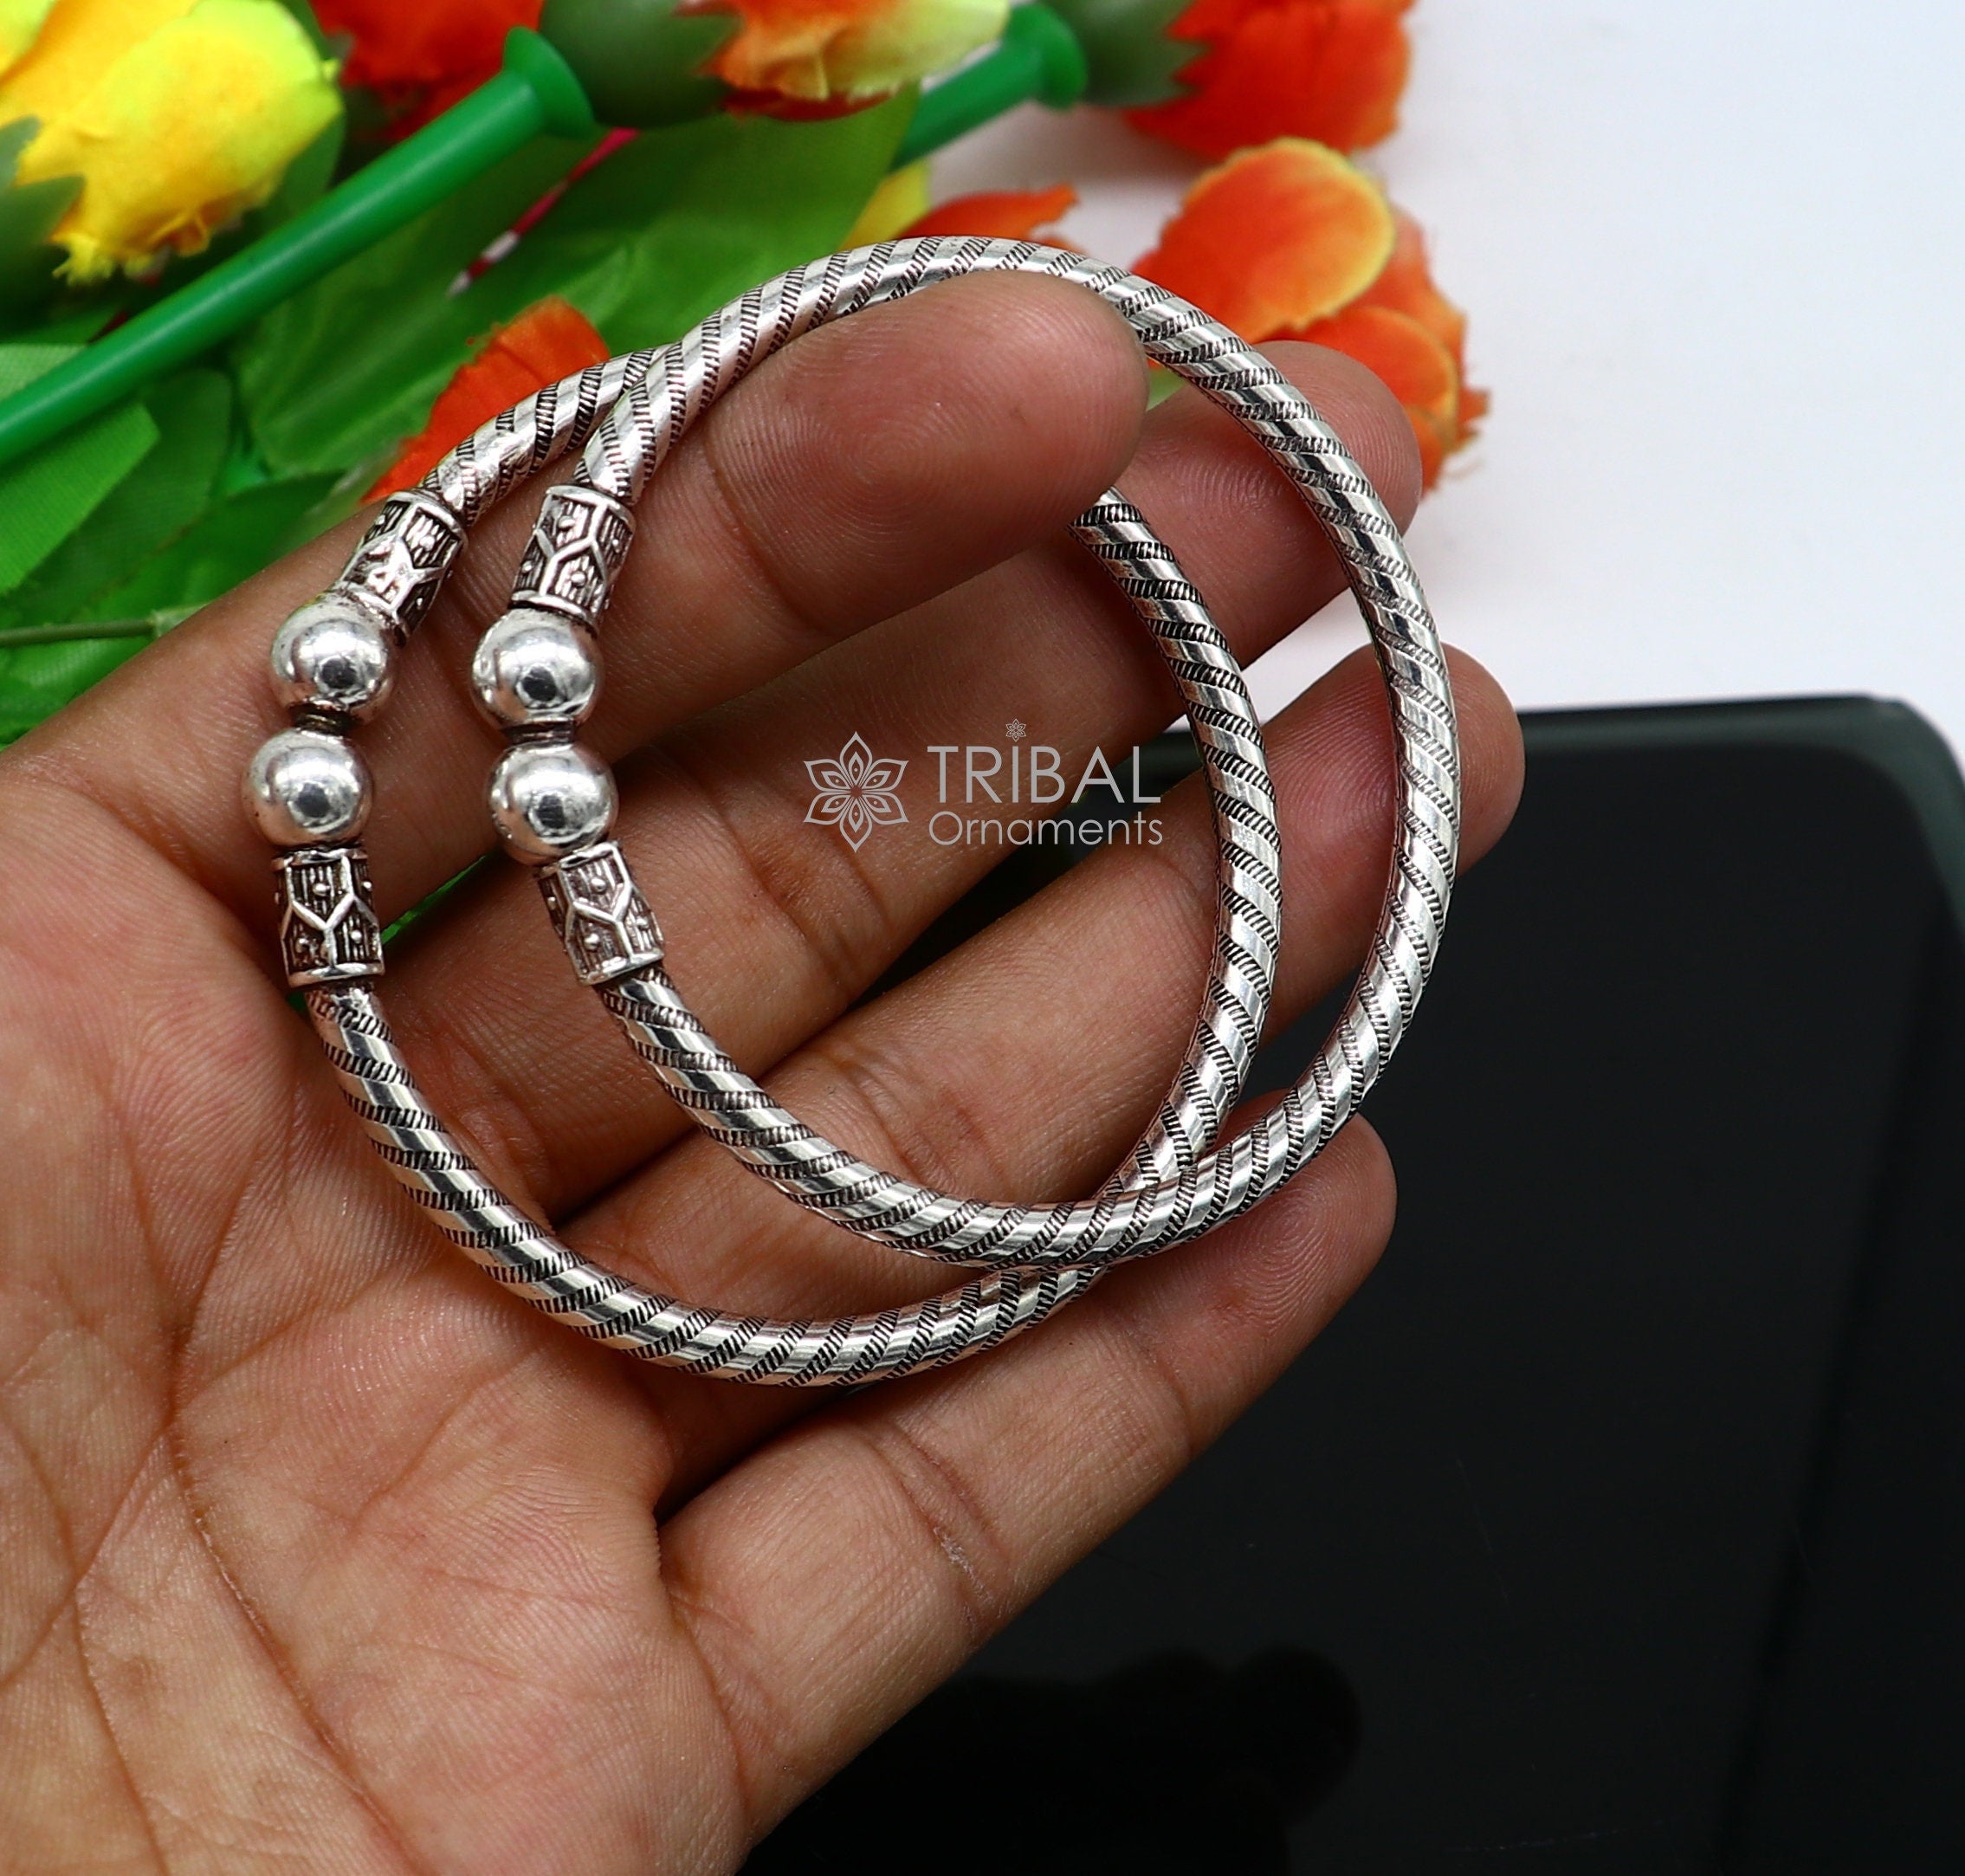 Share more than 78 light weight silver bracelet